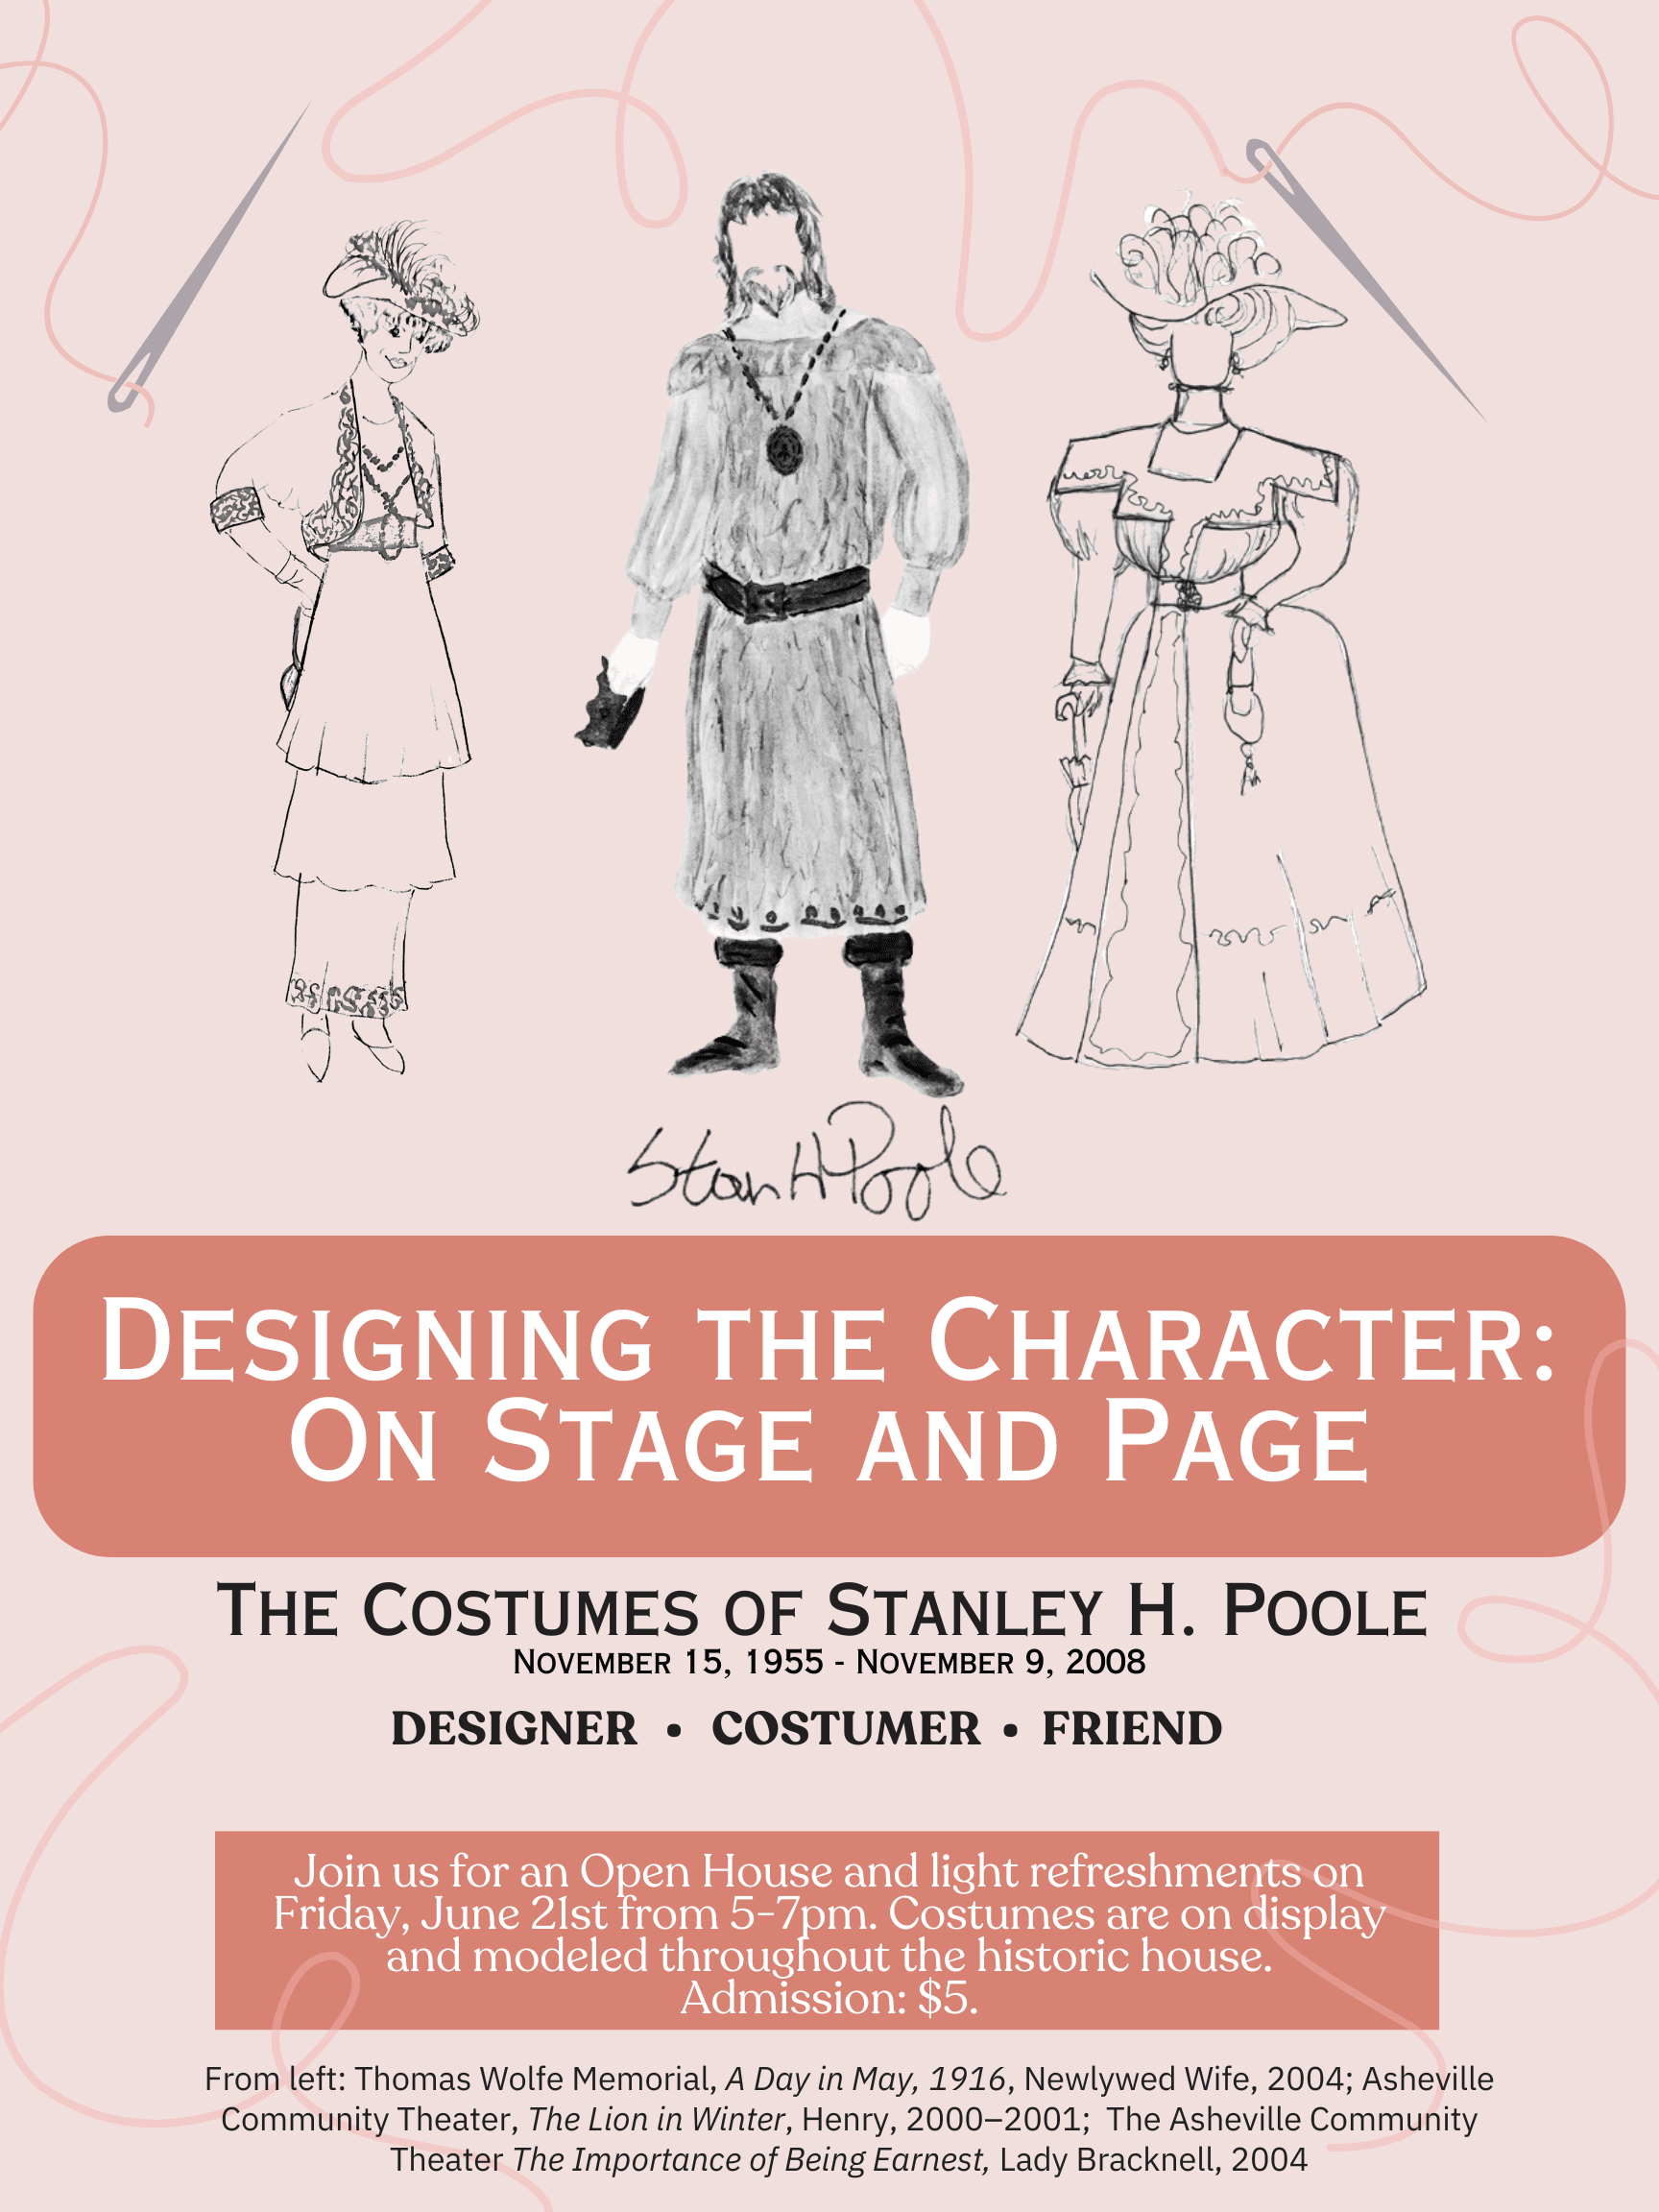 Designing the Character: On Stage and Page